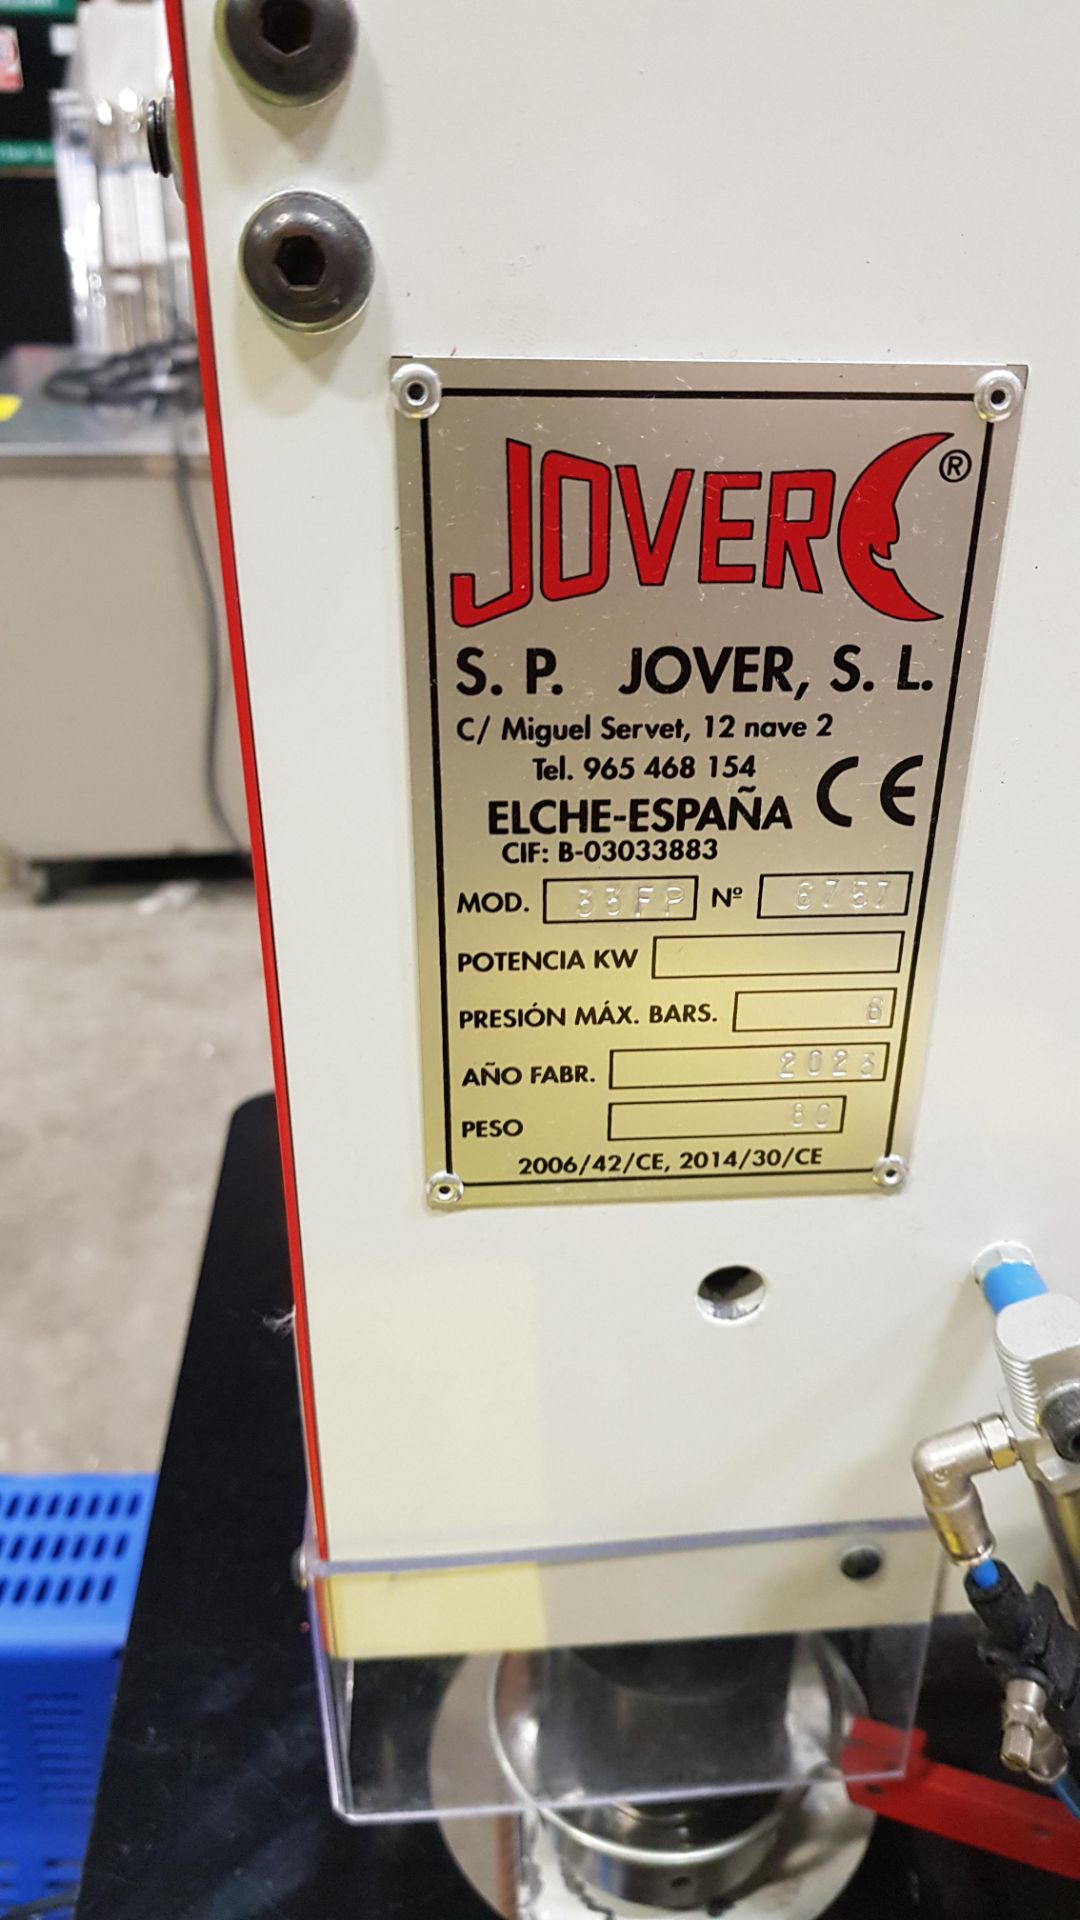 1 X 2023 JOVER PNEUMATIC EYELET MACHINE WITH THREADLE CONTROL ( MODEL 33FP ) WITH 1 X BAMBI PT50 OIL - Image 2 of 3